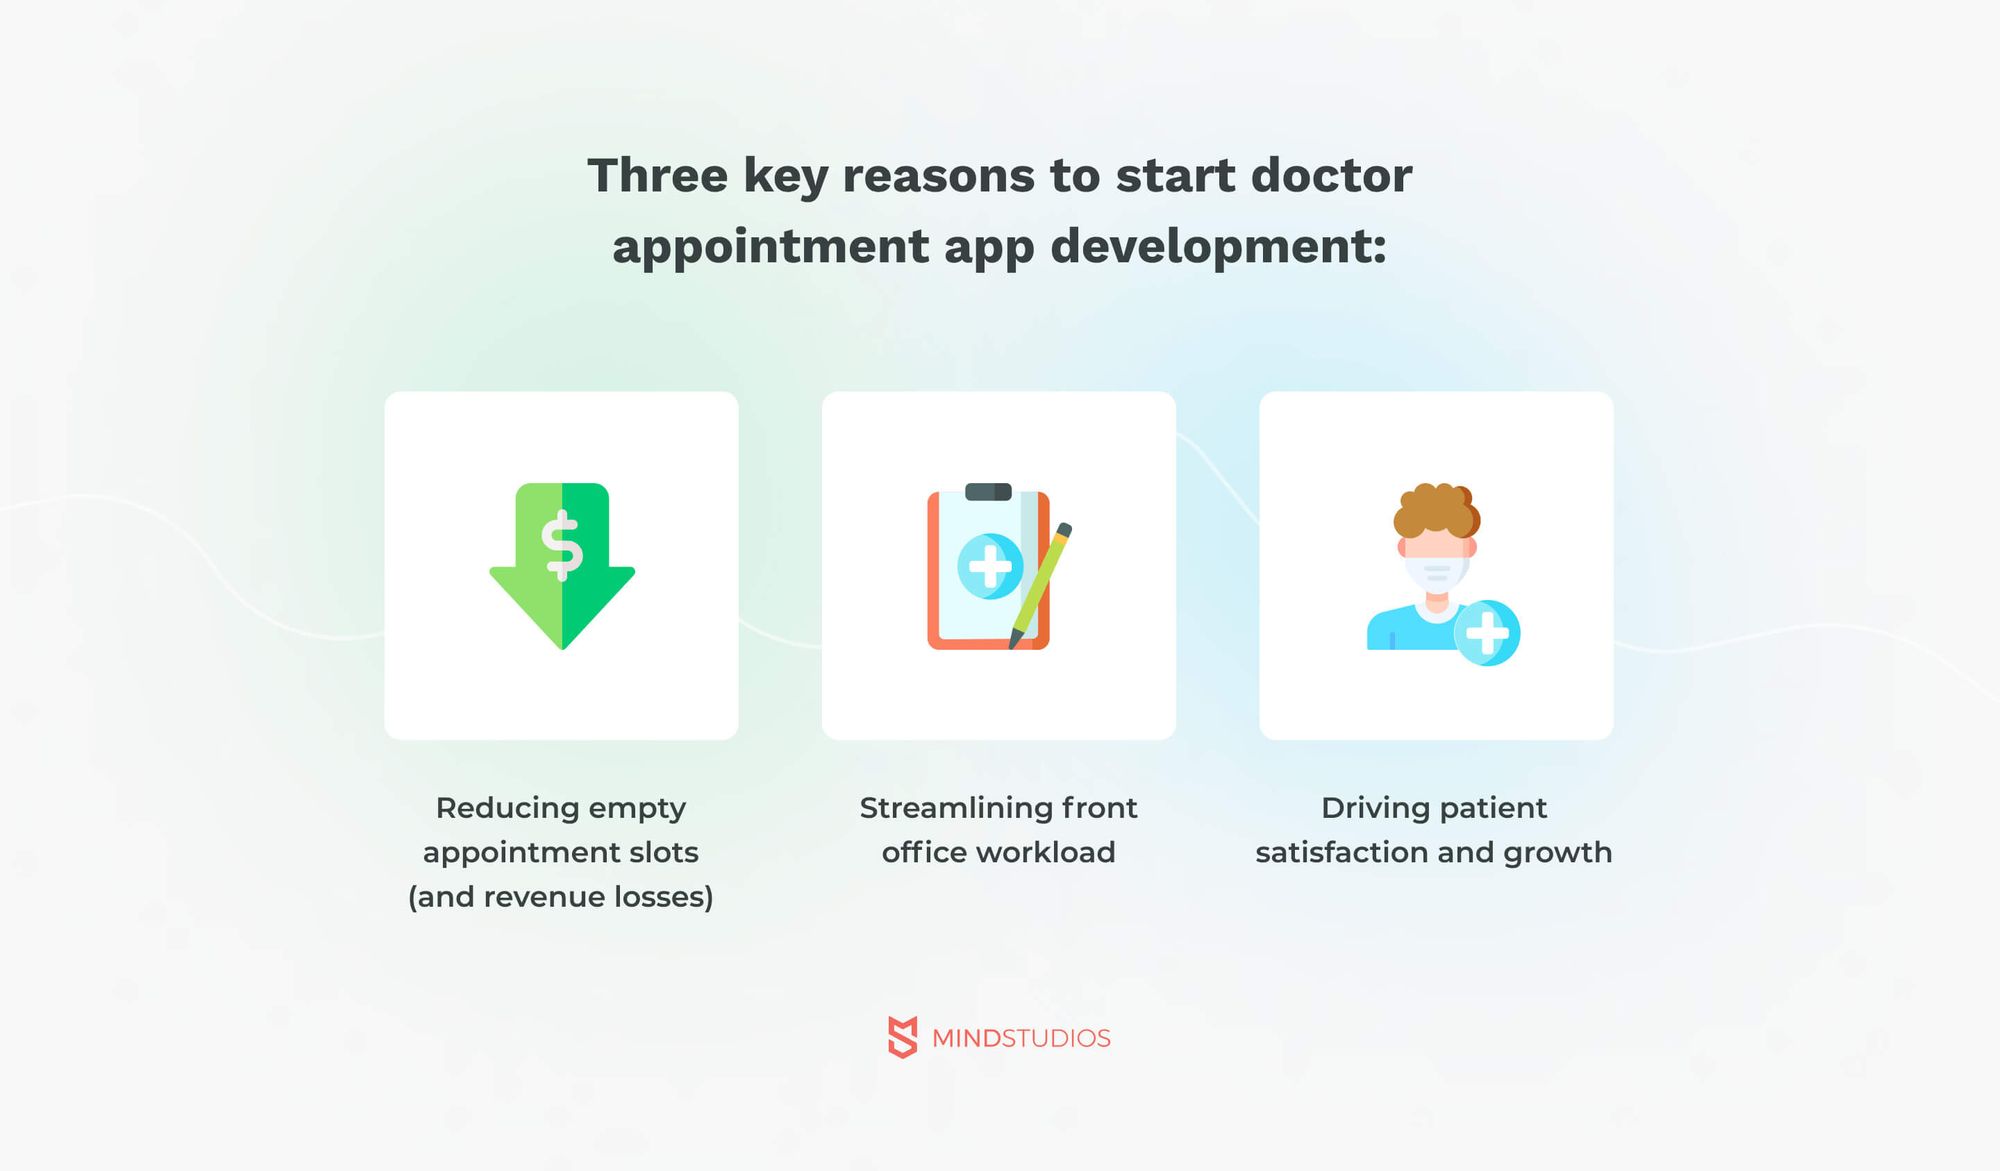 Three key reasons to develop a doctor appointment app